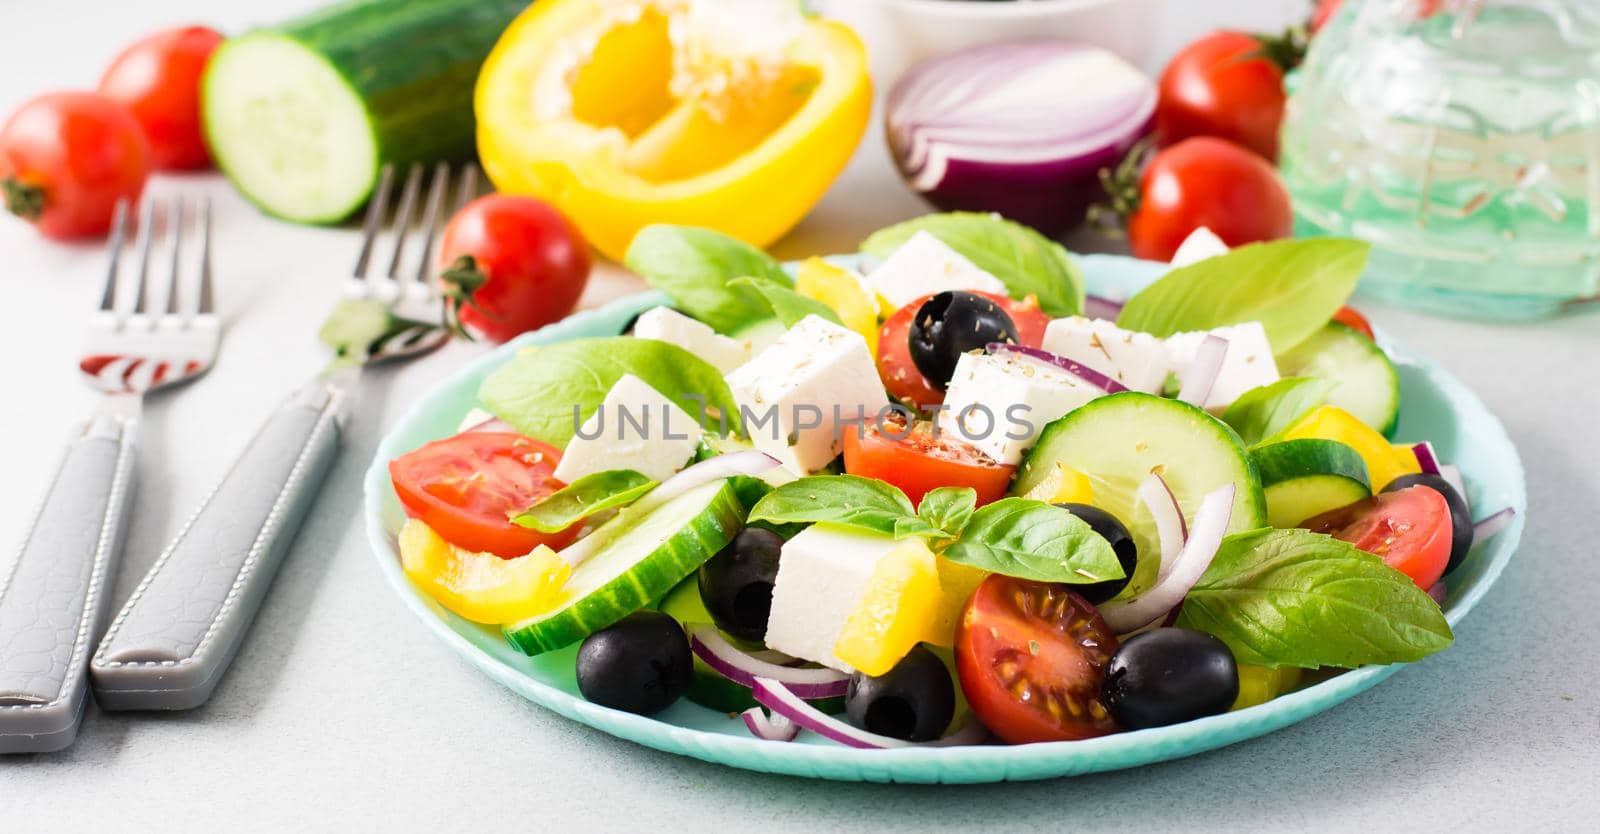 Fresh homemade greek salad with basil leaves on a plate and ingredients for cooking on the table. Domestic life. Web banner by Aleruana